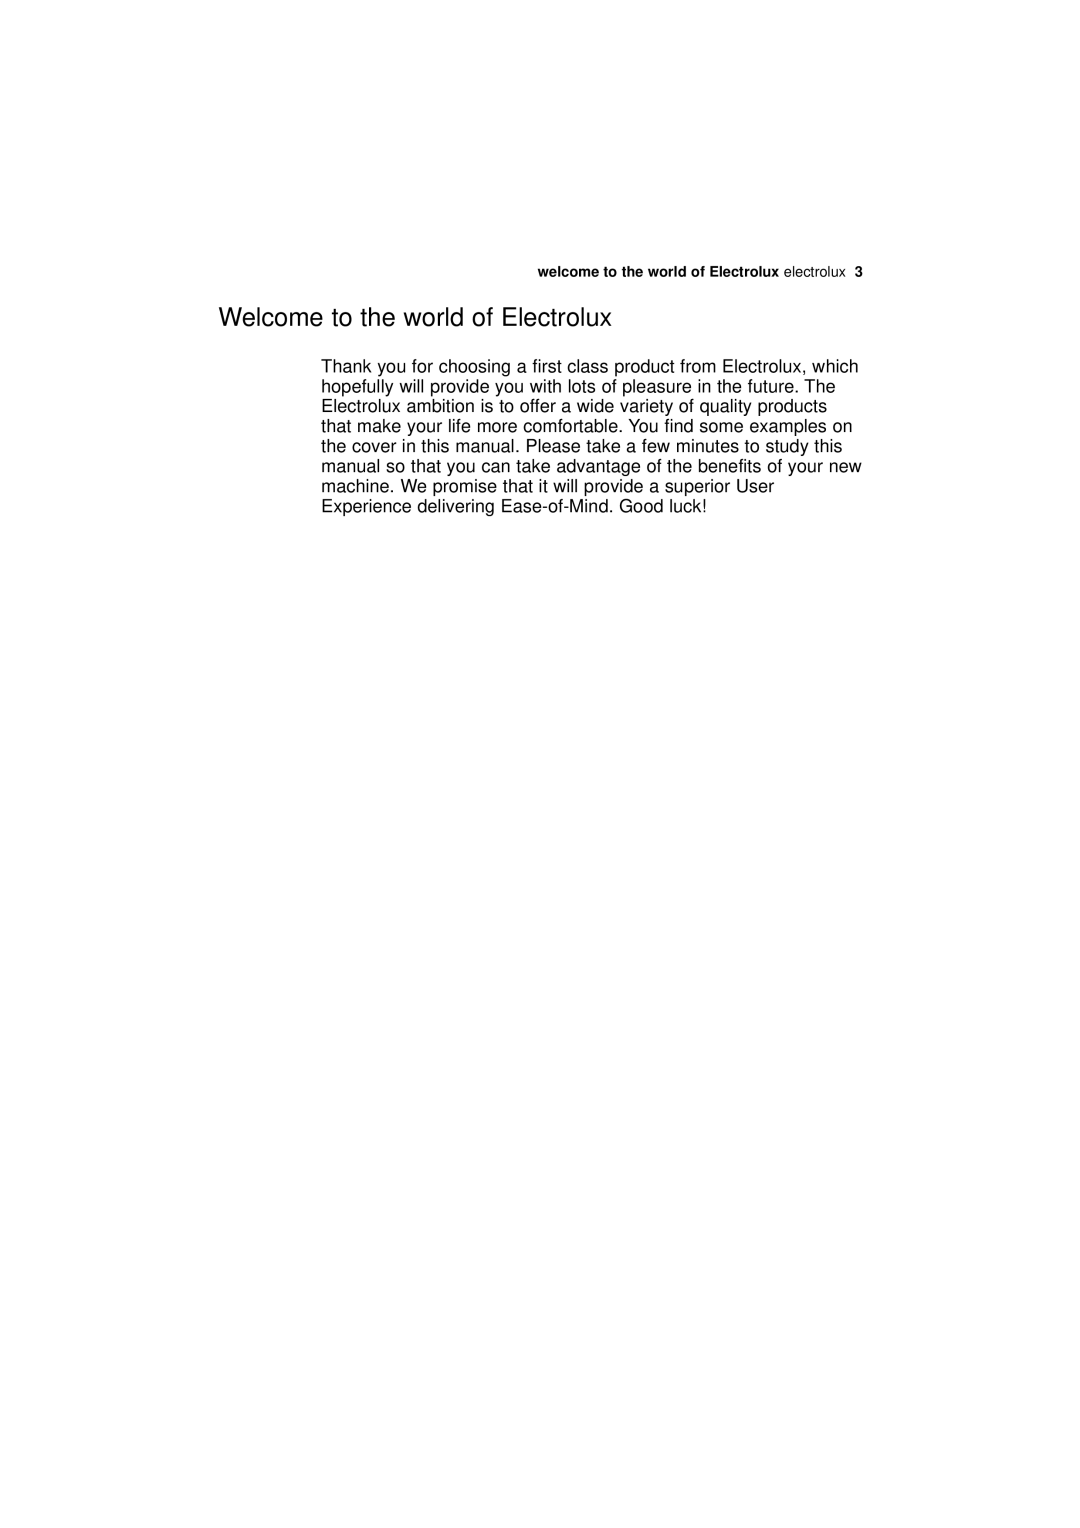 Electrolux ESF 65020 user manual Welcome to the world of Electrolux, welcome to the world of Electrolux 